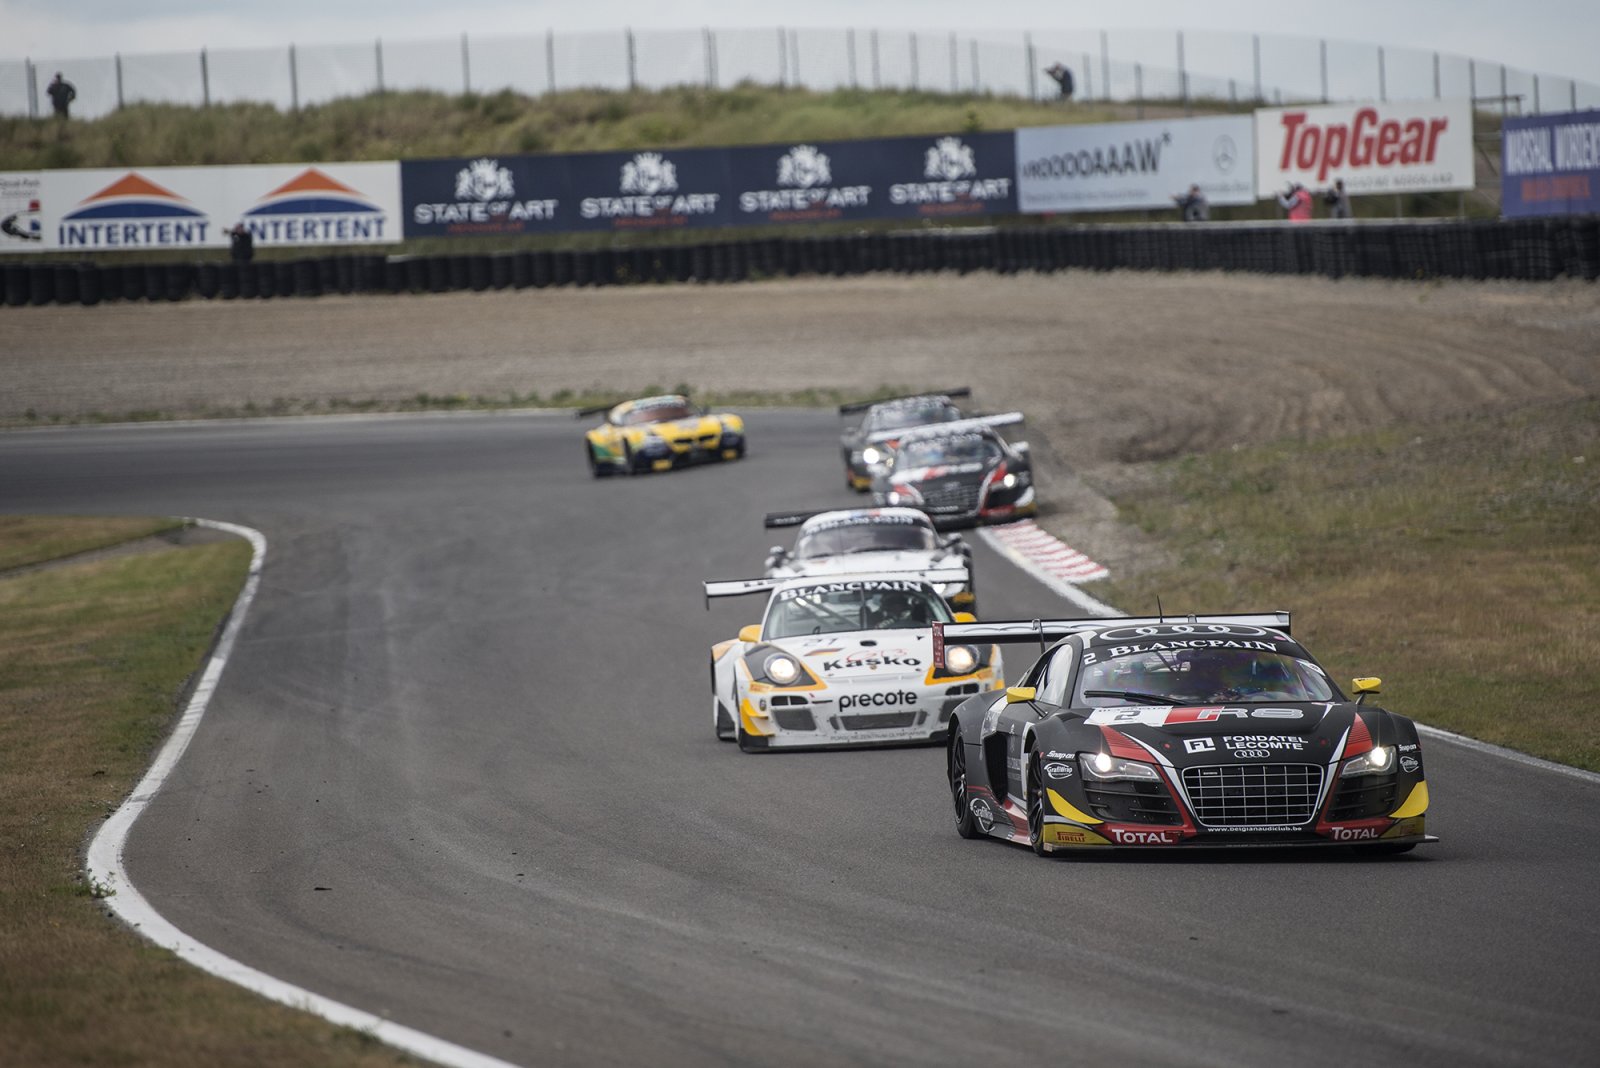 René Rast and Enzo Ide take win in spectacular main race 